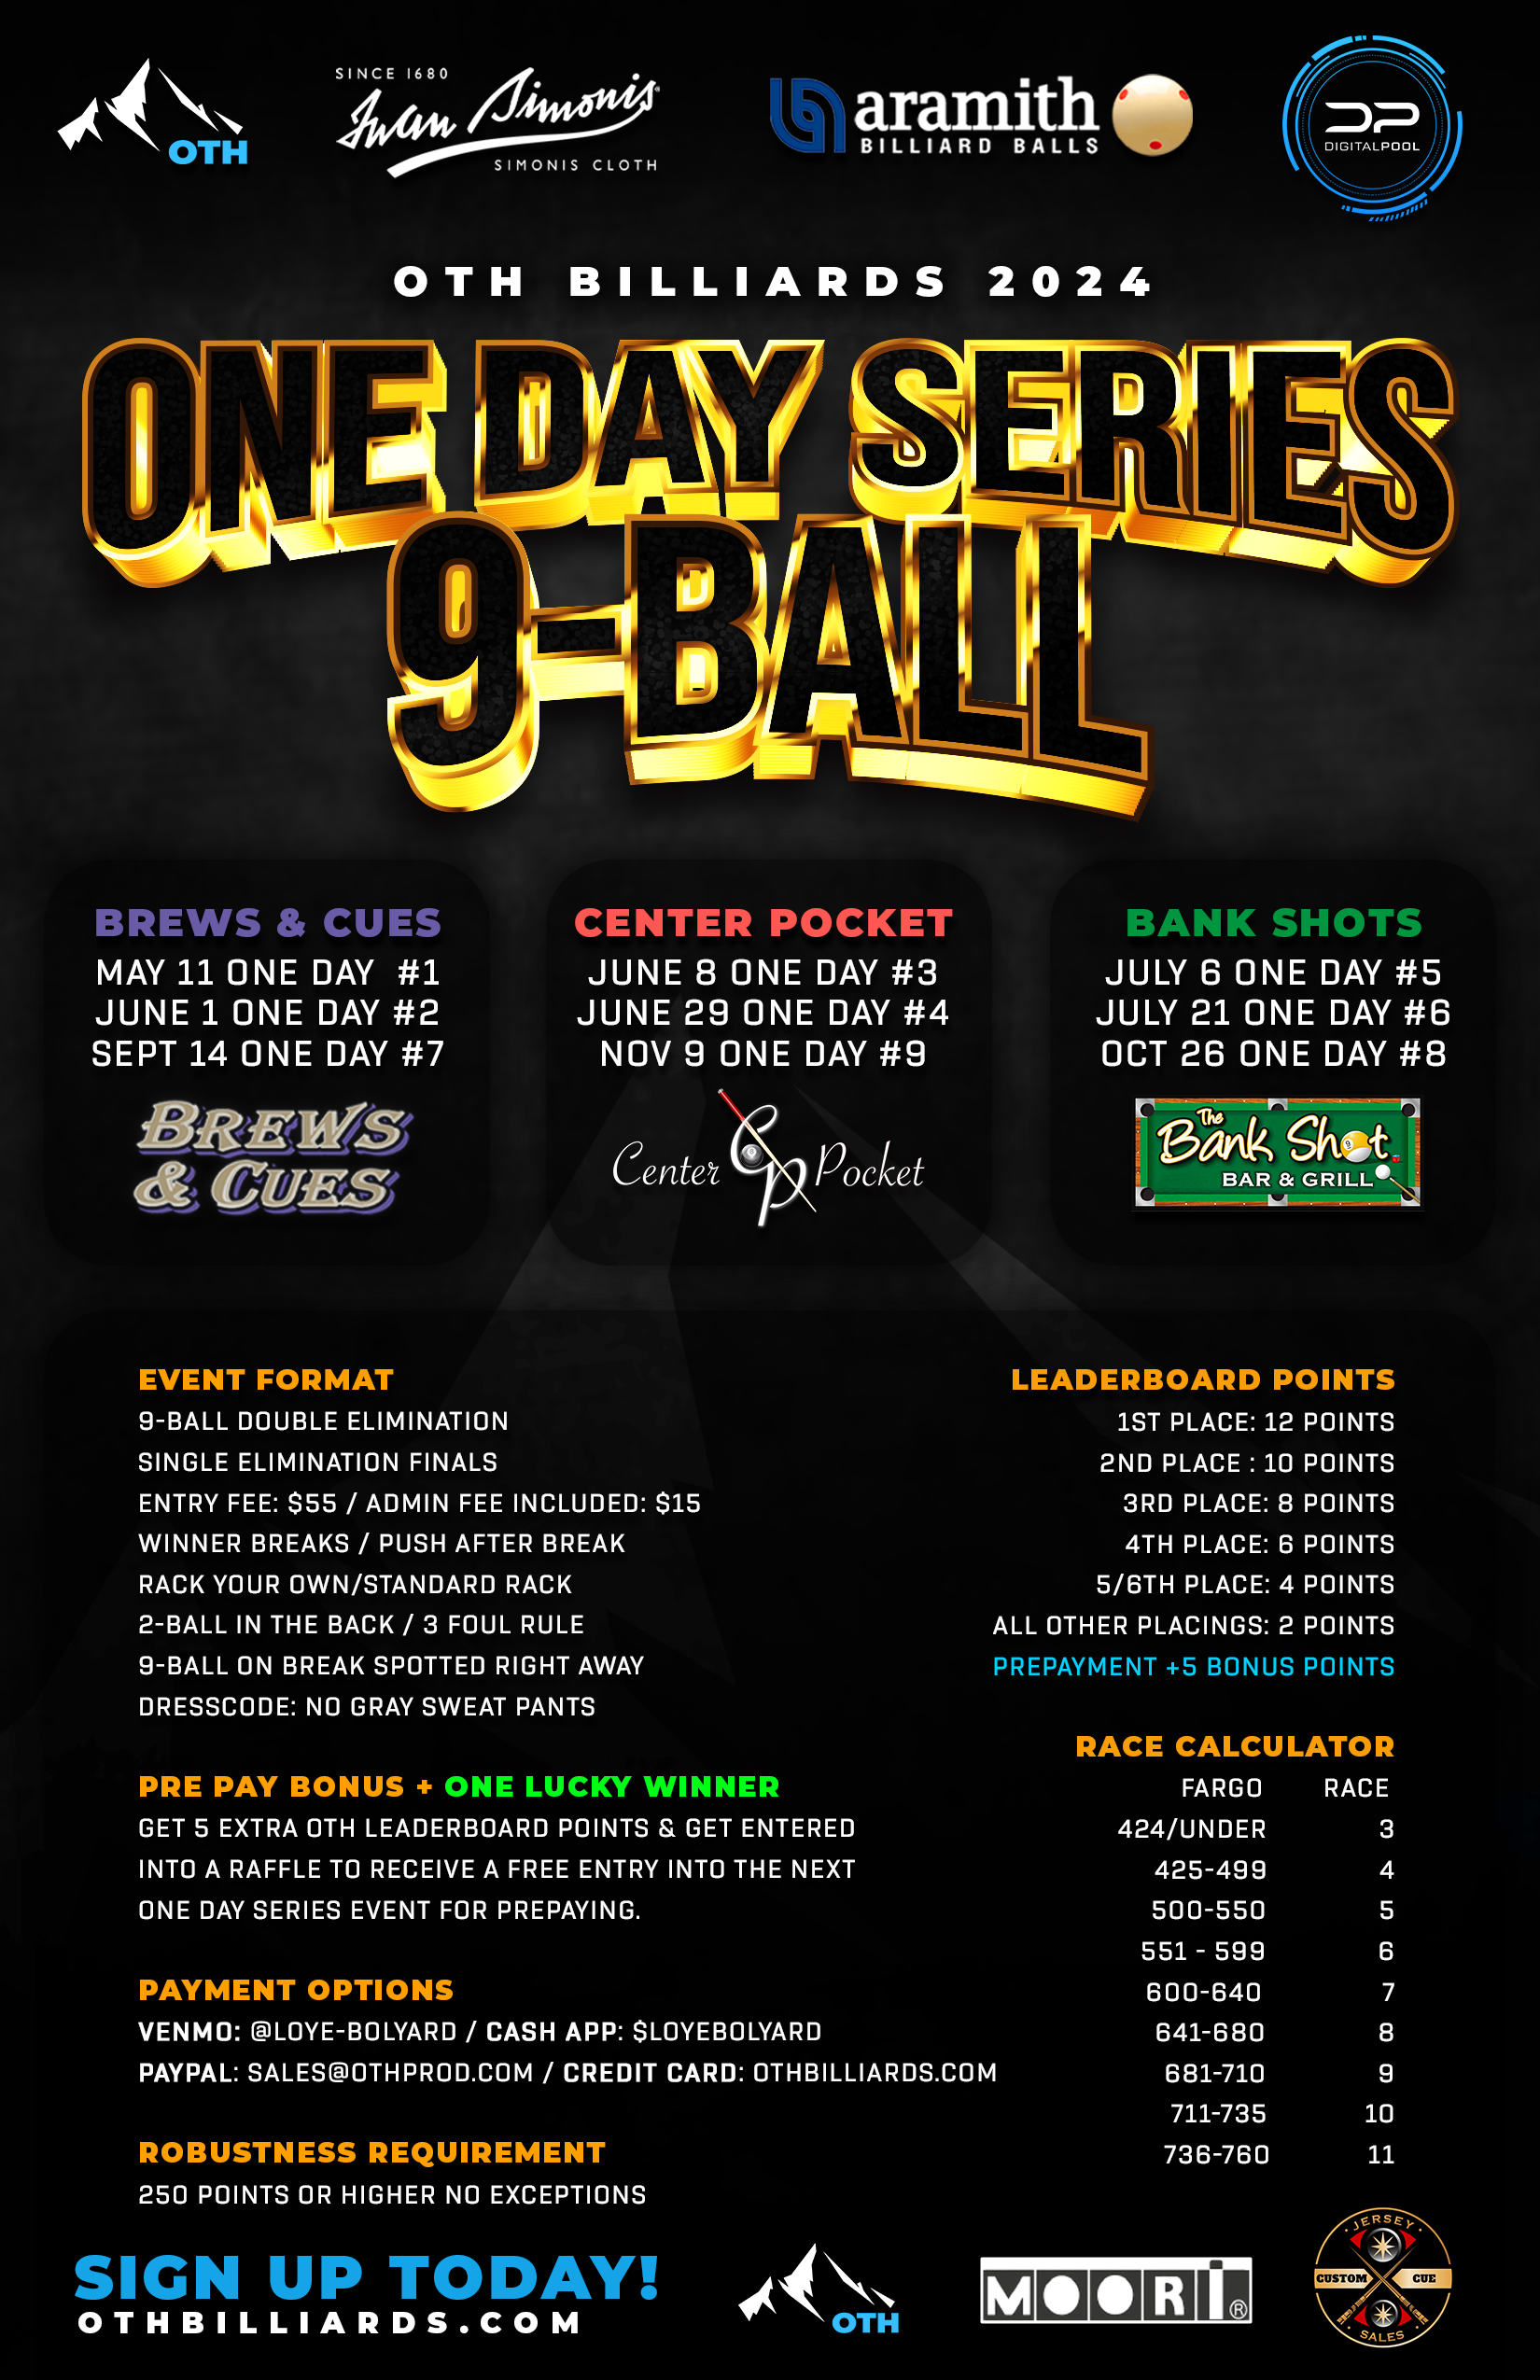 May 11 - One Day Open 9-Ball Series Event #1